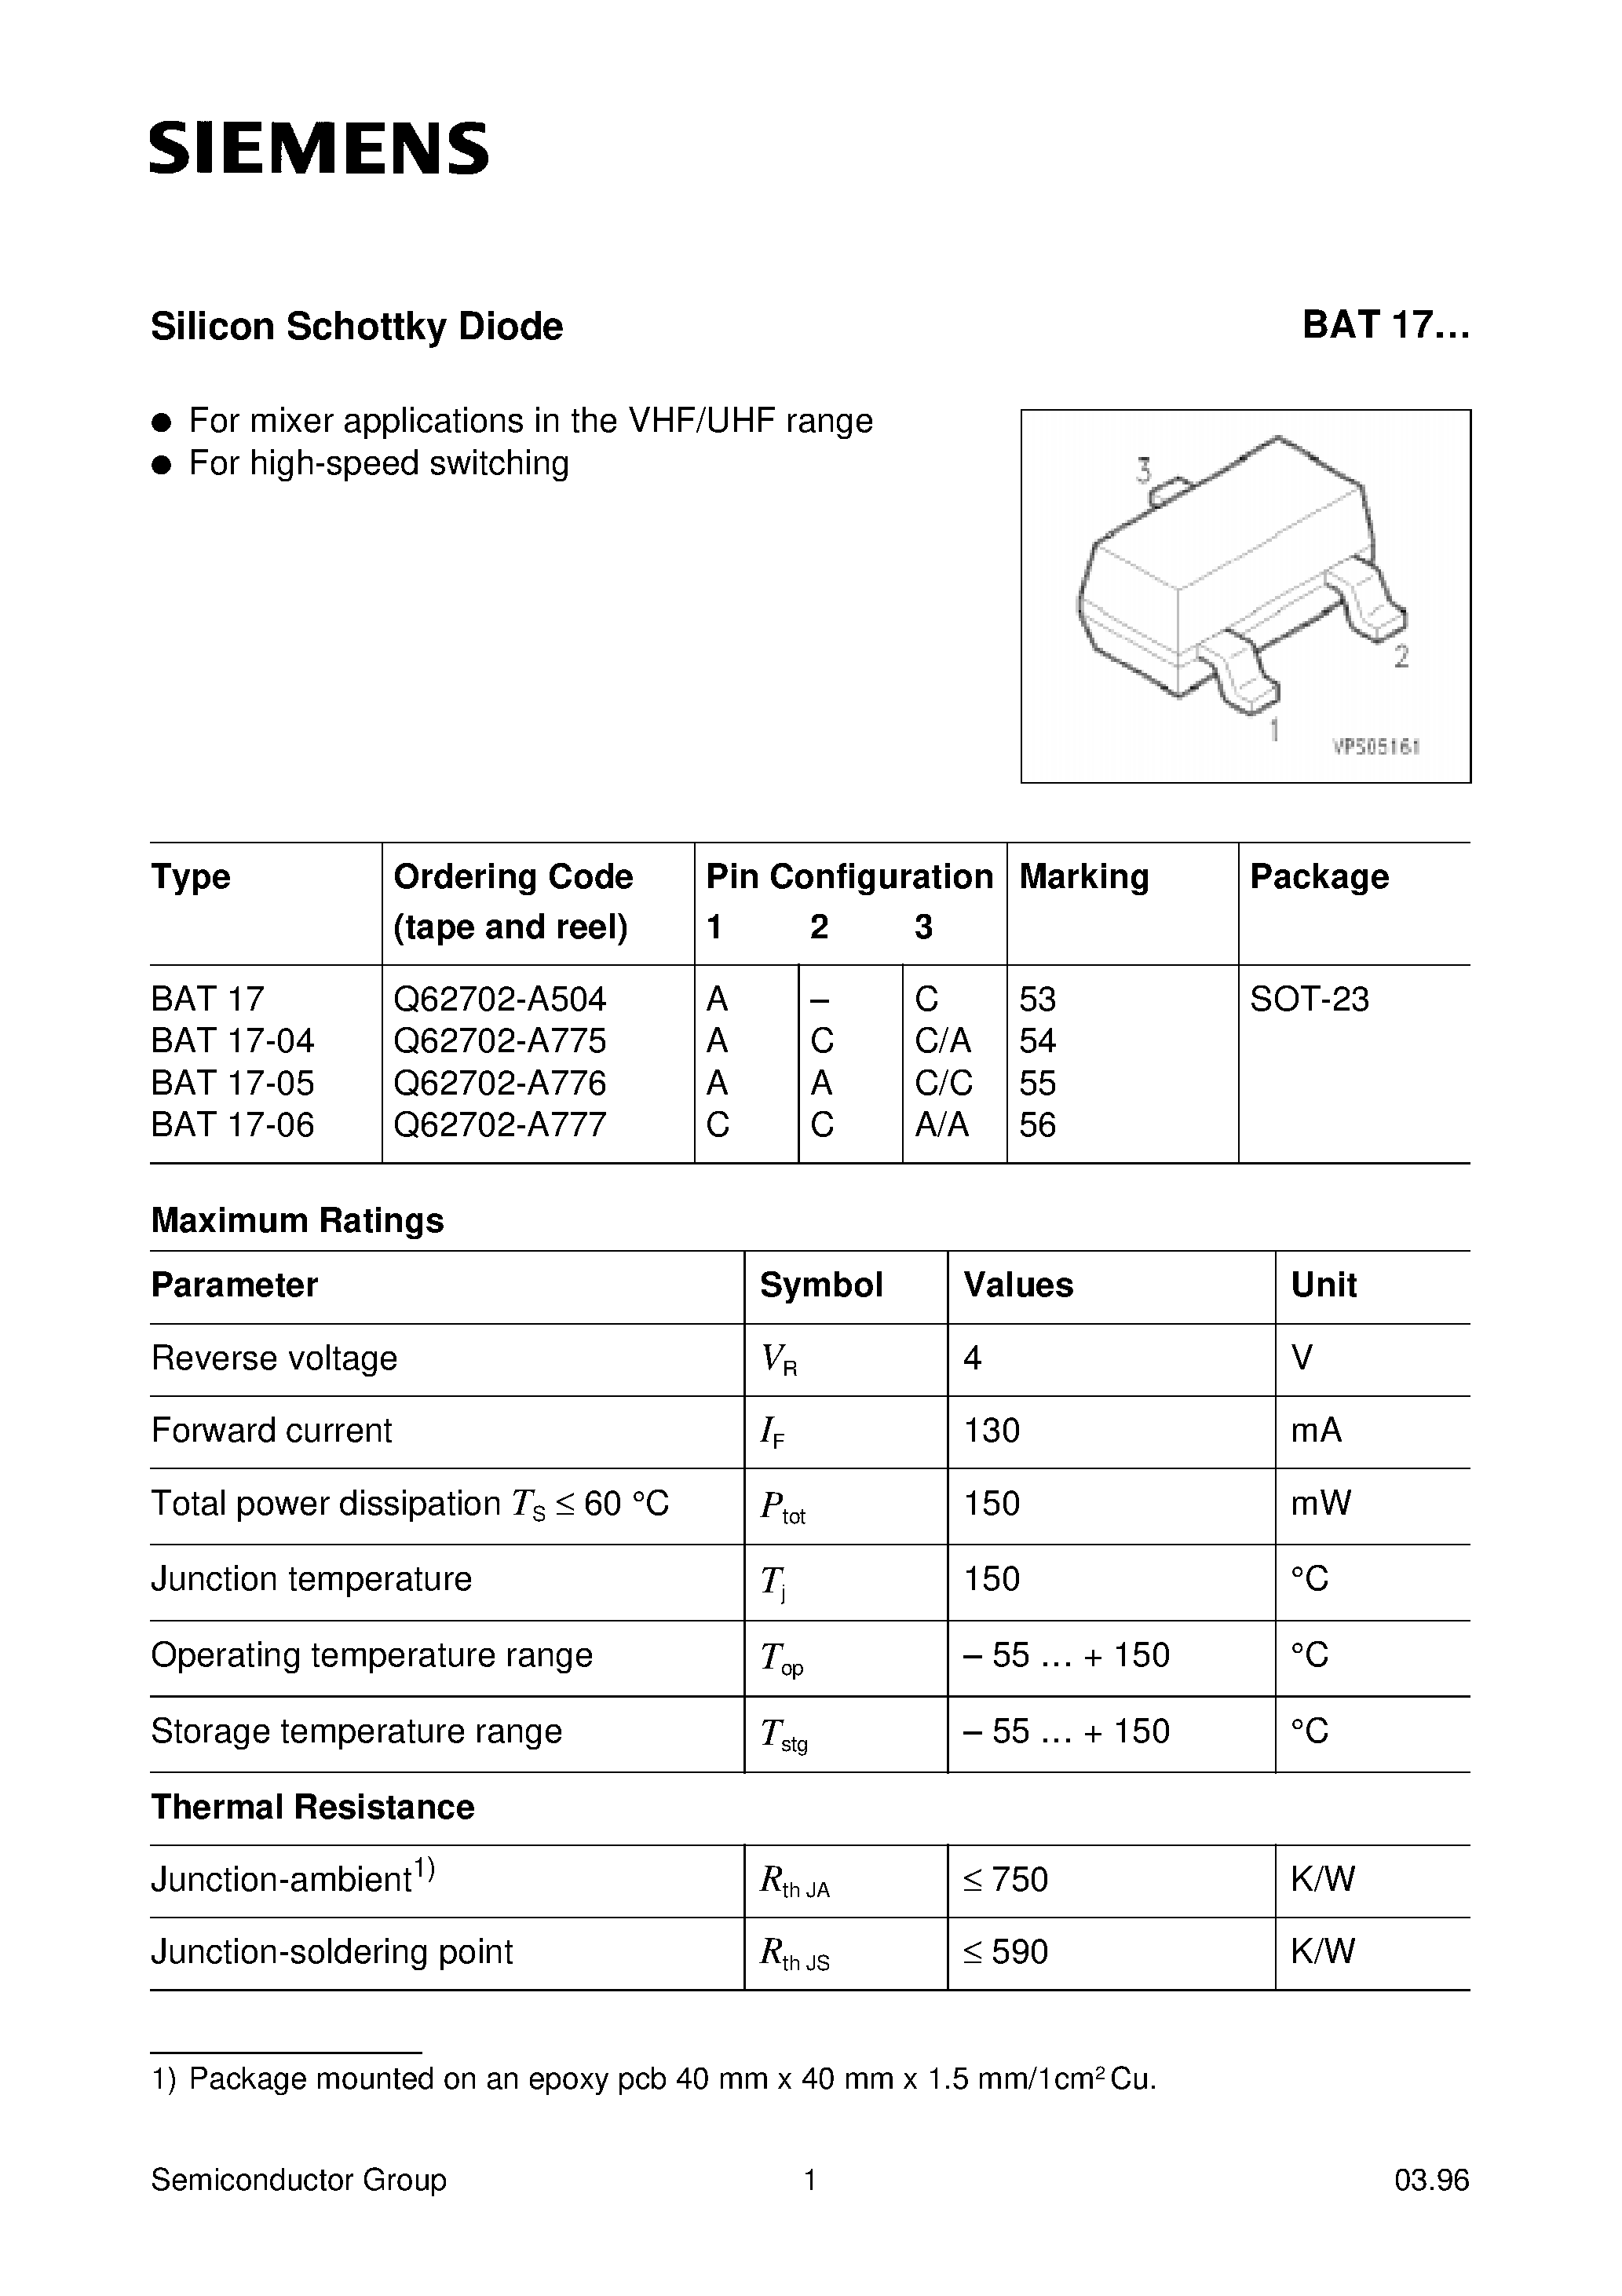 Datasheet BAT17- - Silicon Schottky Diode (For mixer applications in the VHF/UHF range For high-speed switching) page 1